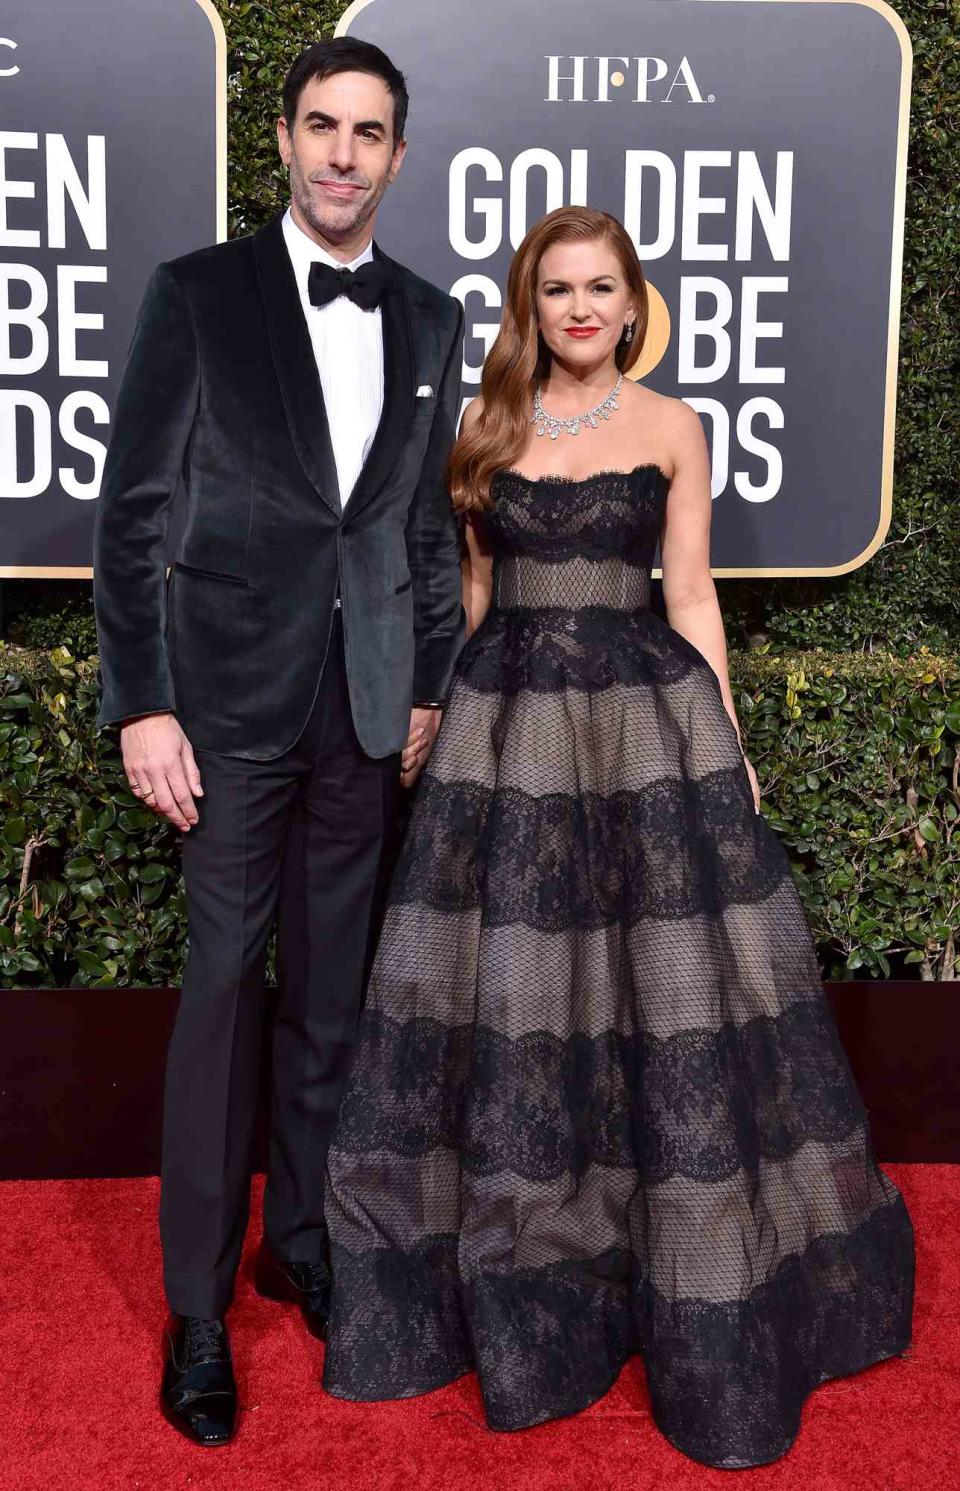 Sacha Baron Cohen and Isla Fisher attend the 76th Annual Golden Globe Awards at The Beverly Hilton Hotel on January 6, 2019 in Beverly Hills, California